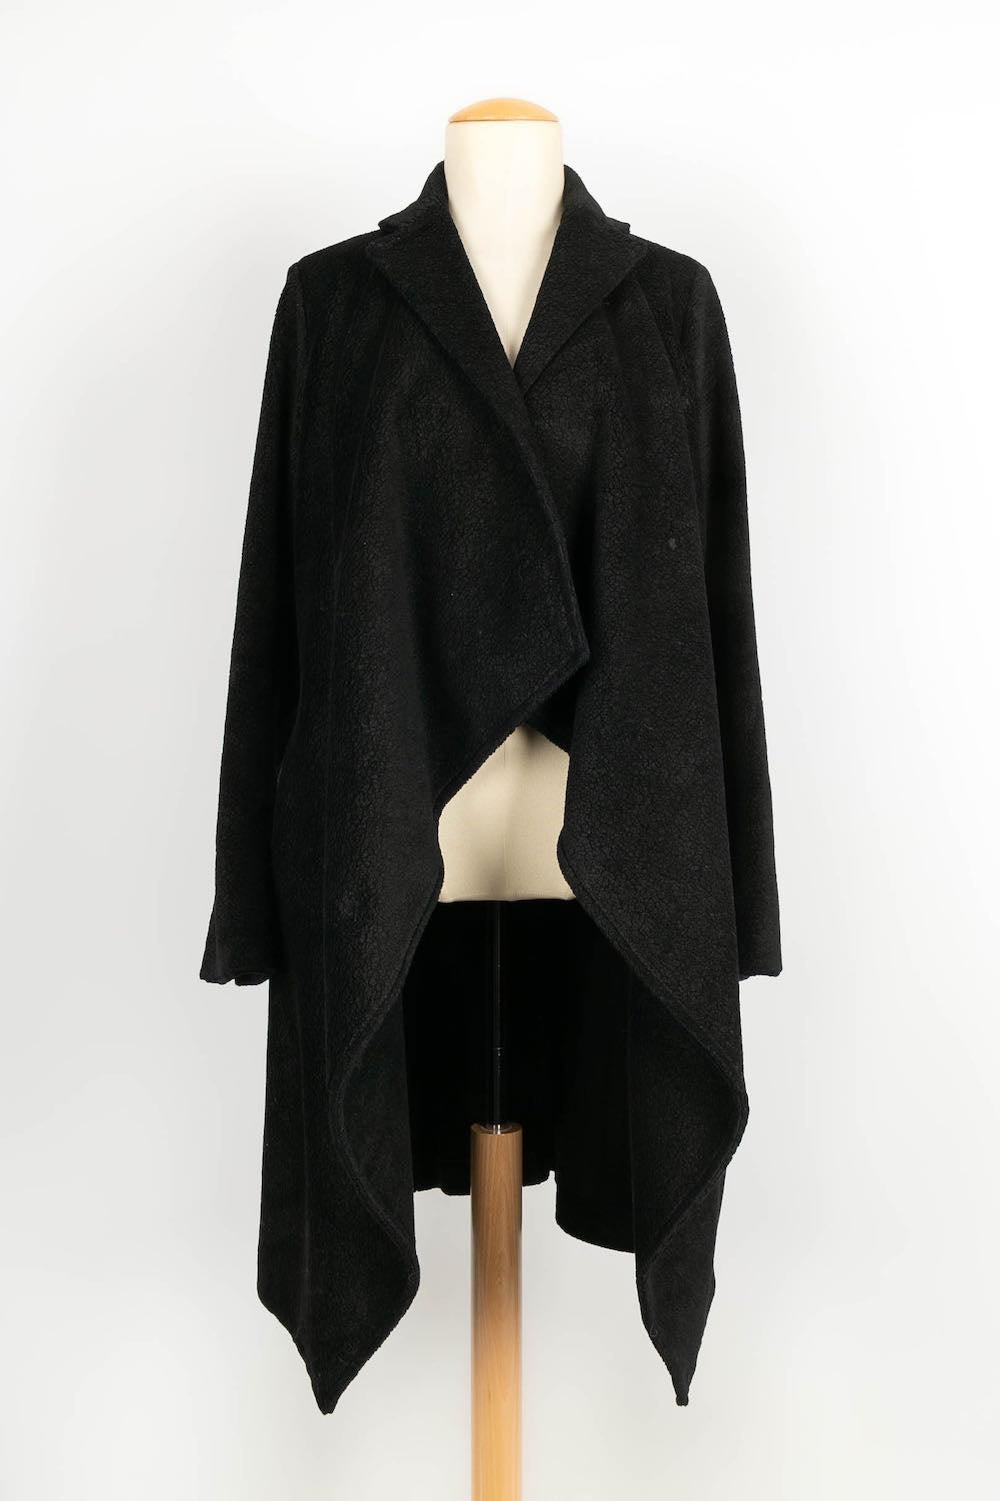 Peachoo + Krejberg - (Made in Italy) Black coat made of cotton with a furry finish. Size S.

Additional information:
Condition: Very good condition
Dimensions: Shoulder width: 42 cm - Sleeve length: 62 cm - Length: 110 cm

Seller Reference: M37